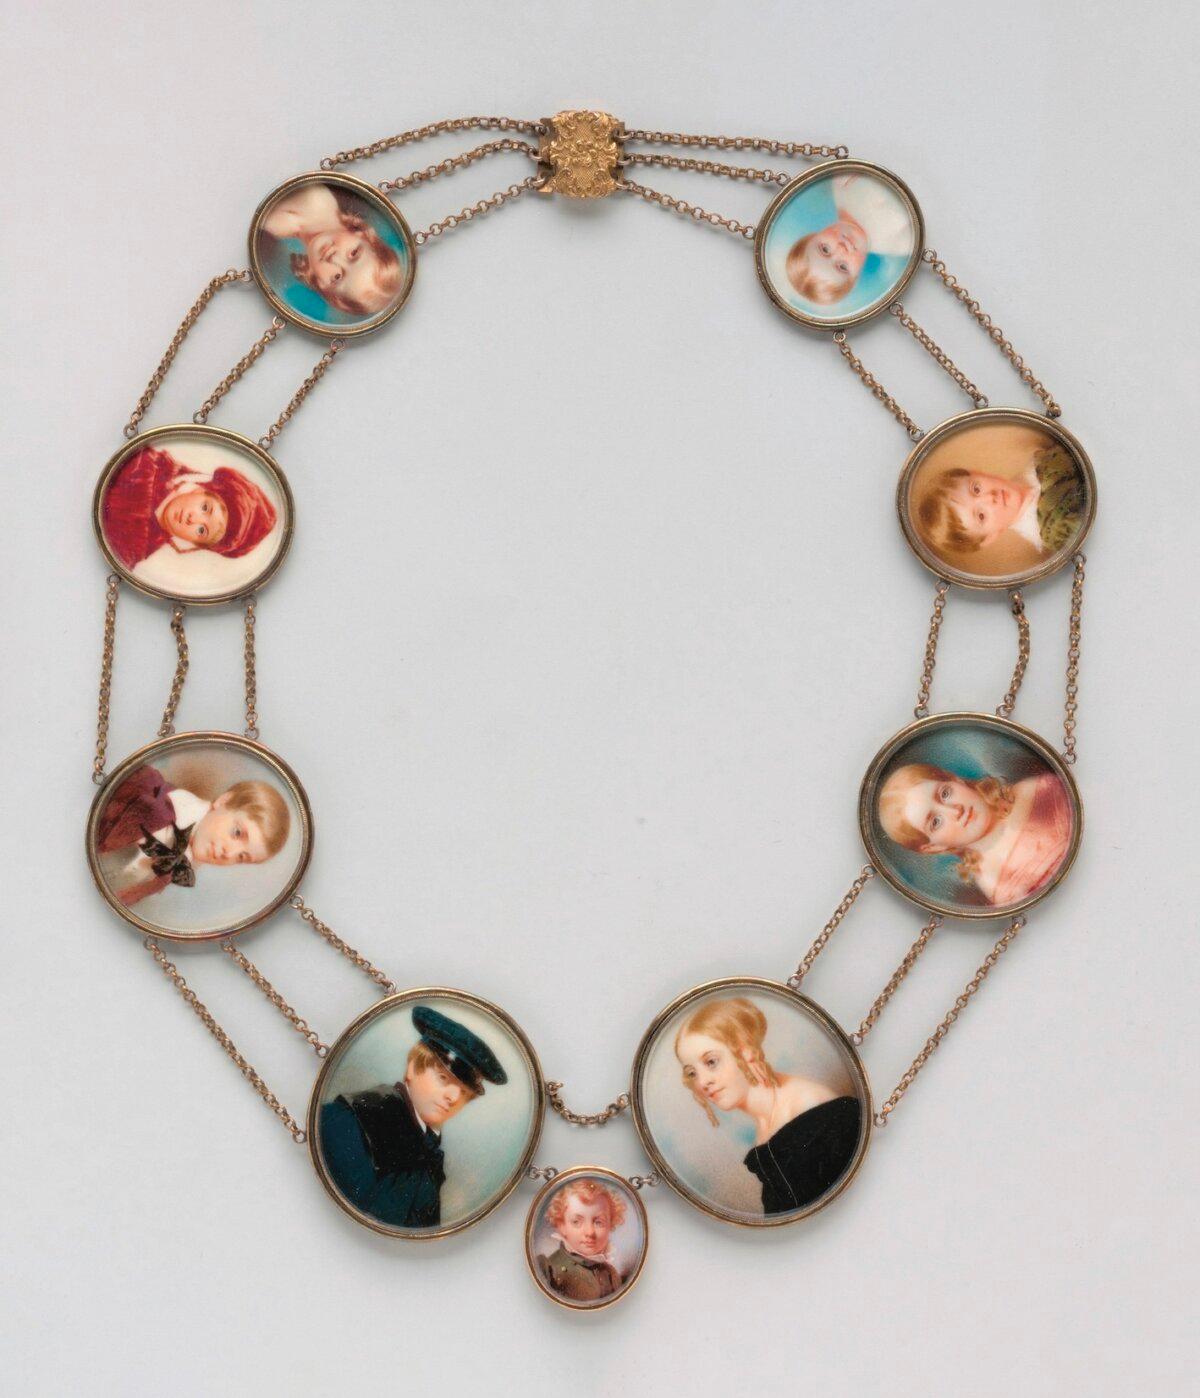 “A Mother’s Pearls” by Thomas Seir Cummings, 1841. The artist crafted this necklace for his wife, with portraits of their children. Watercolor on ivory. The Metropolitan Museum of Art, New York. (Public Domain)